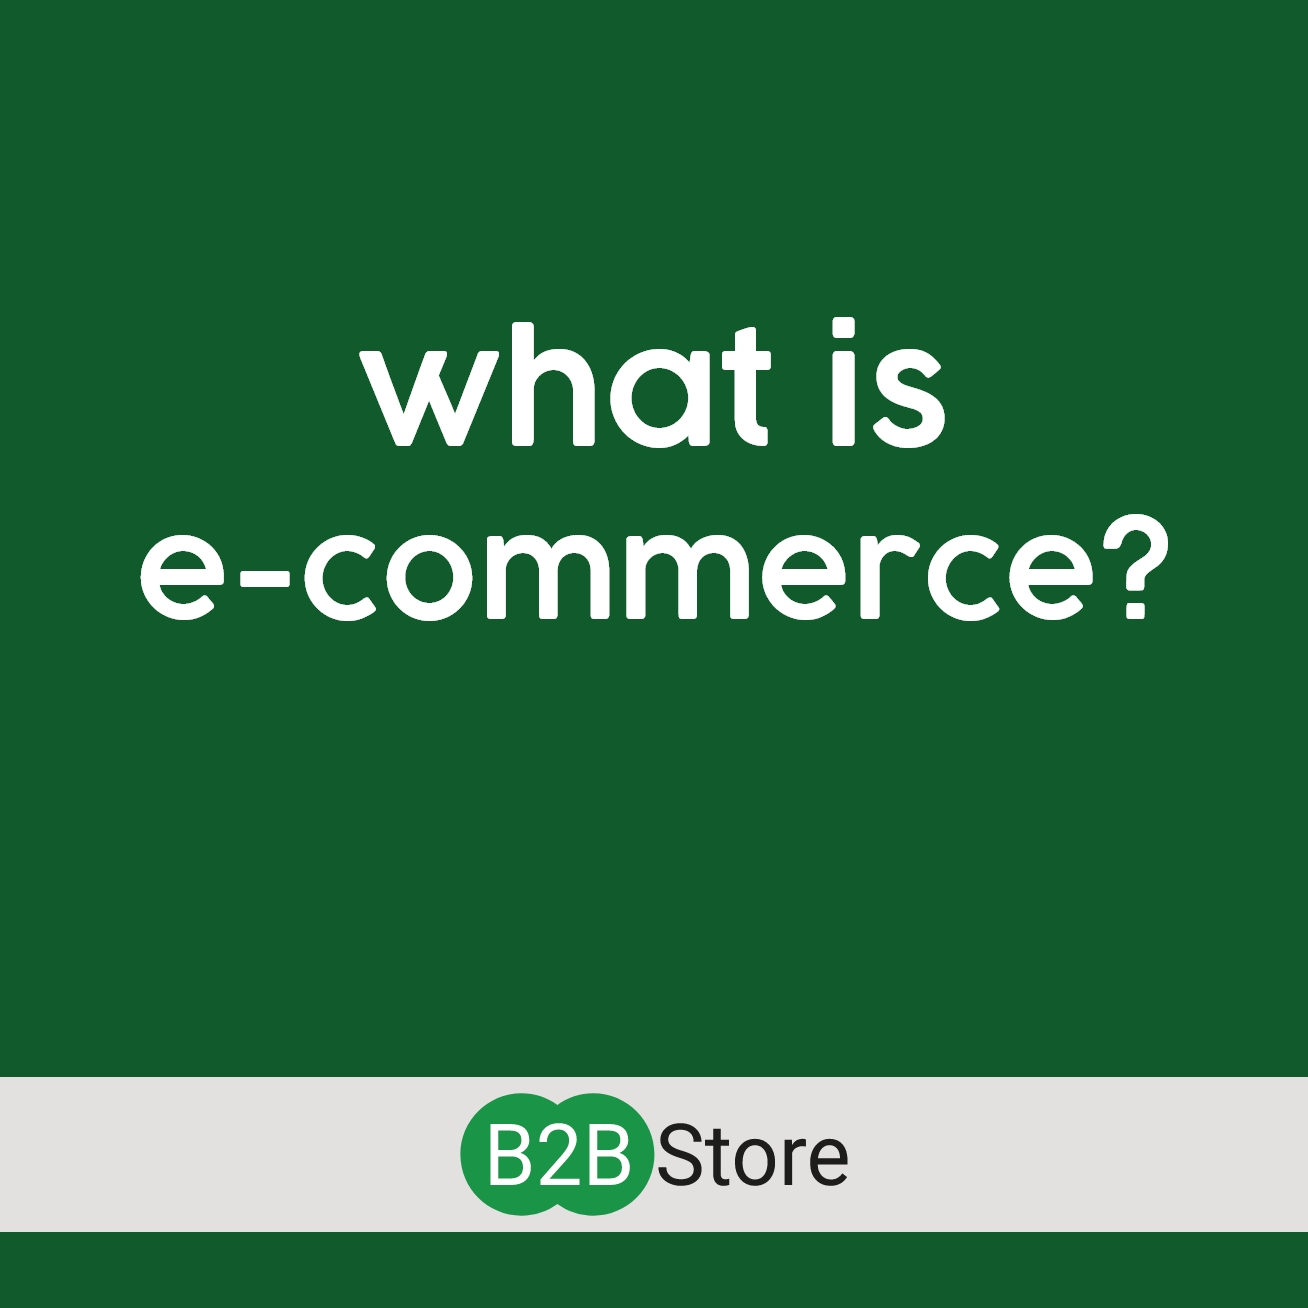 B2B Store WHAT IS eCOMMERCE?